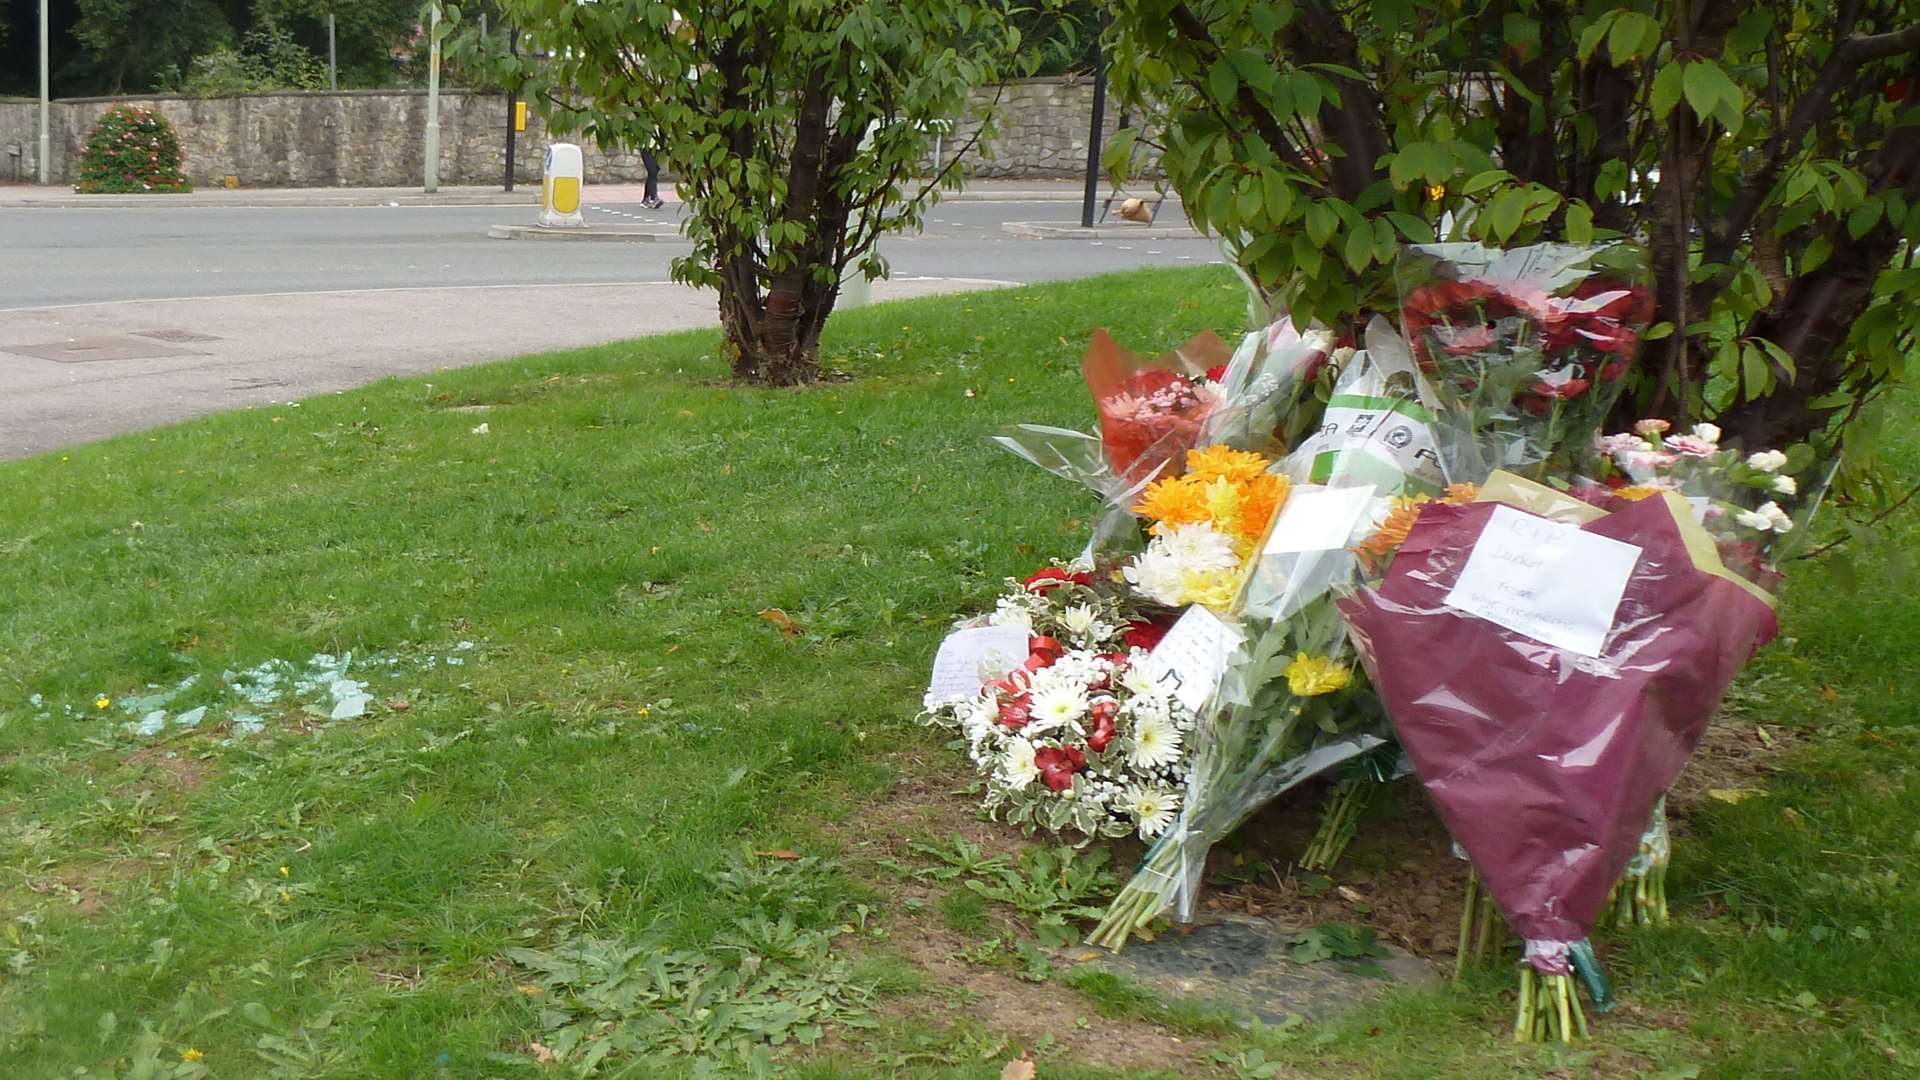 Bunches of flowers left at the crash site in Ashford